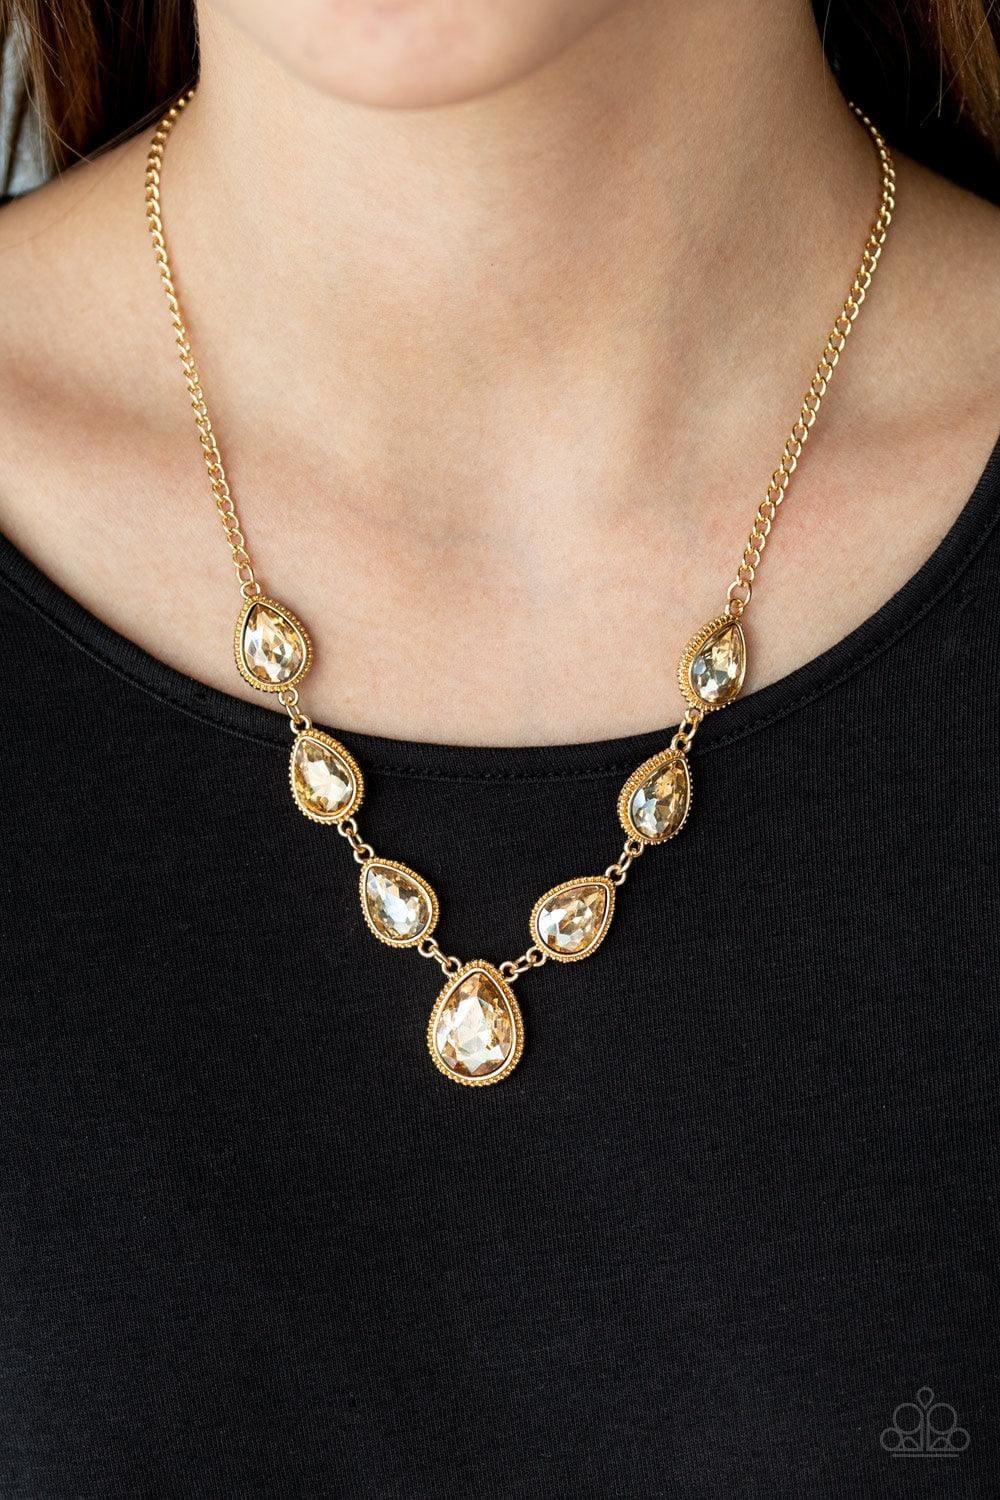 Paparazzi Accessories - Socialite Social - Gold Necklace - Bling by JessieK